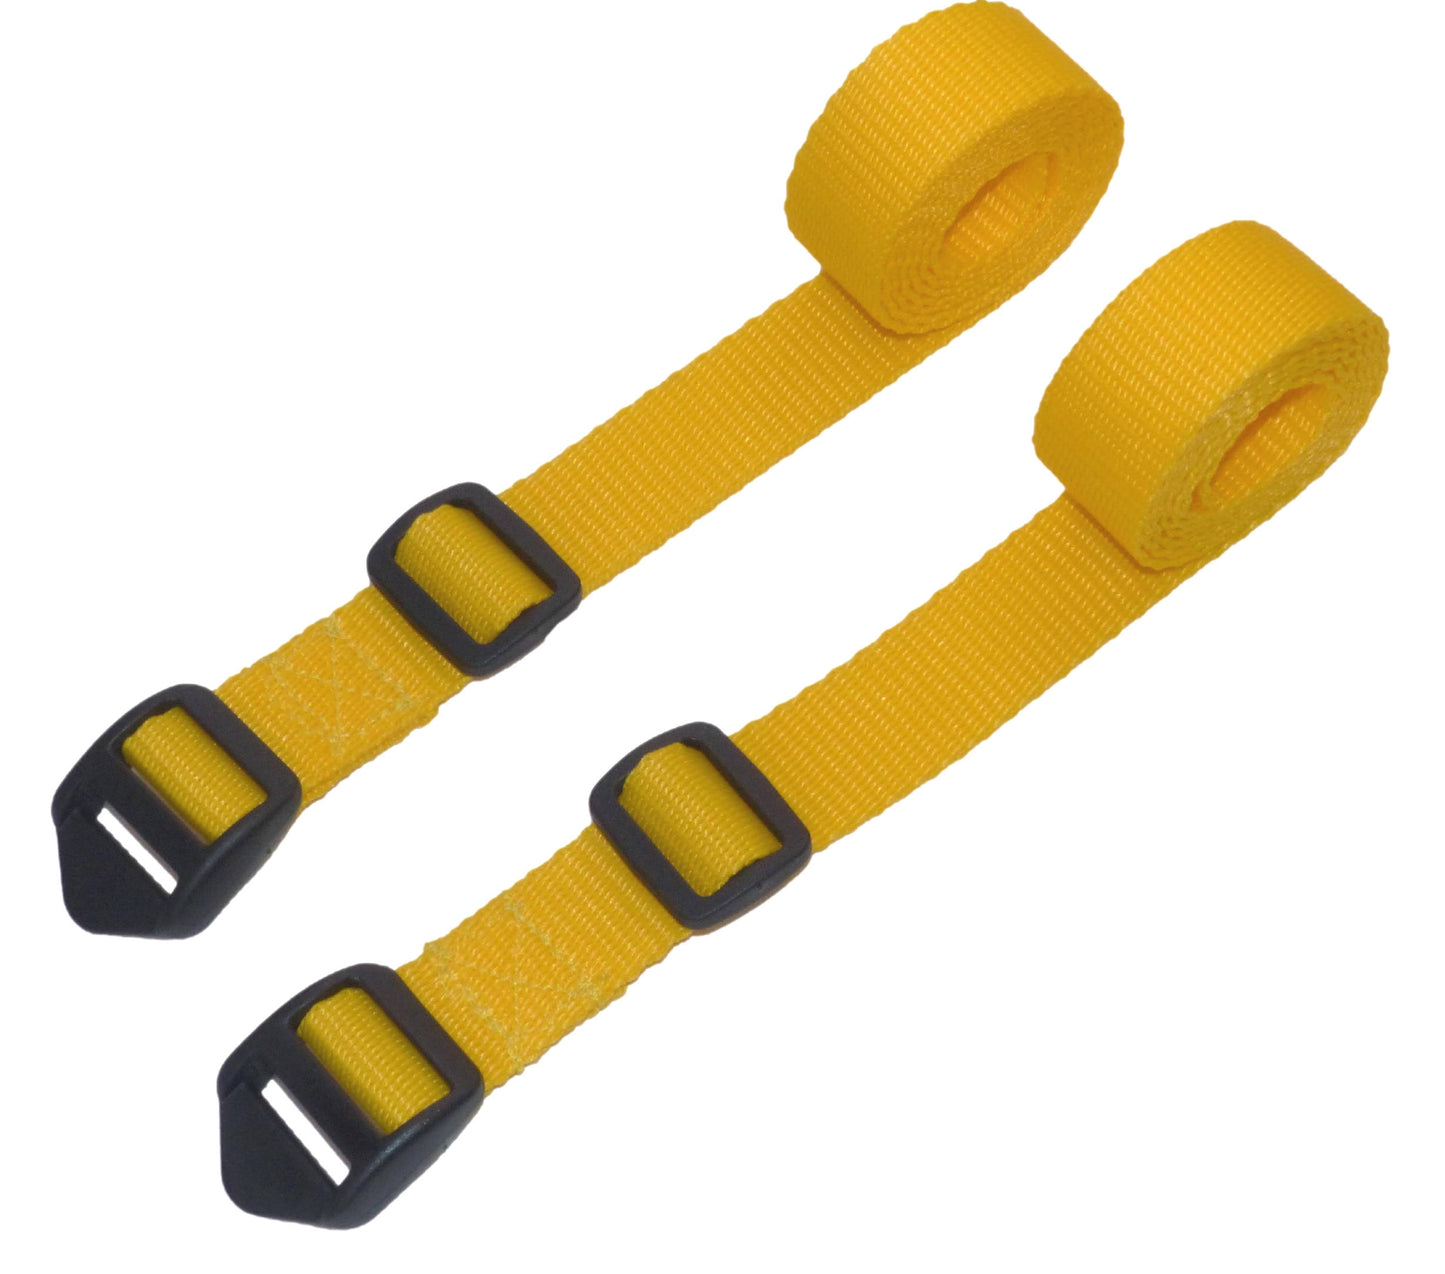 Benristraps 25mm Webbing Strap with Ladderloc Buckle (Pair) in yellow